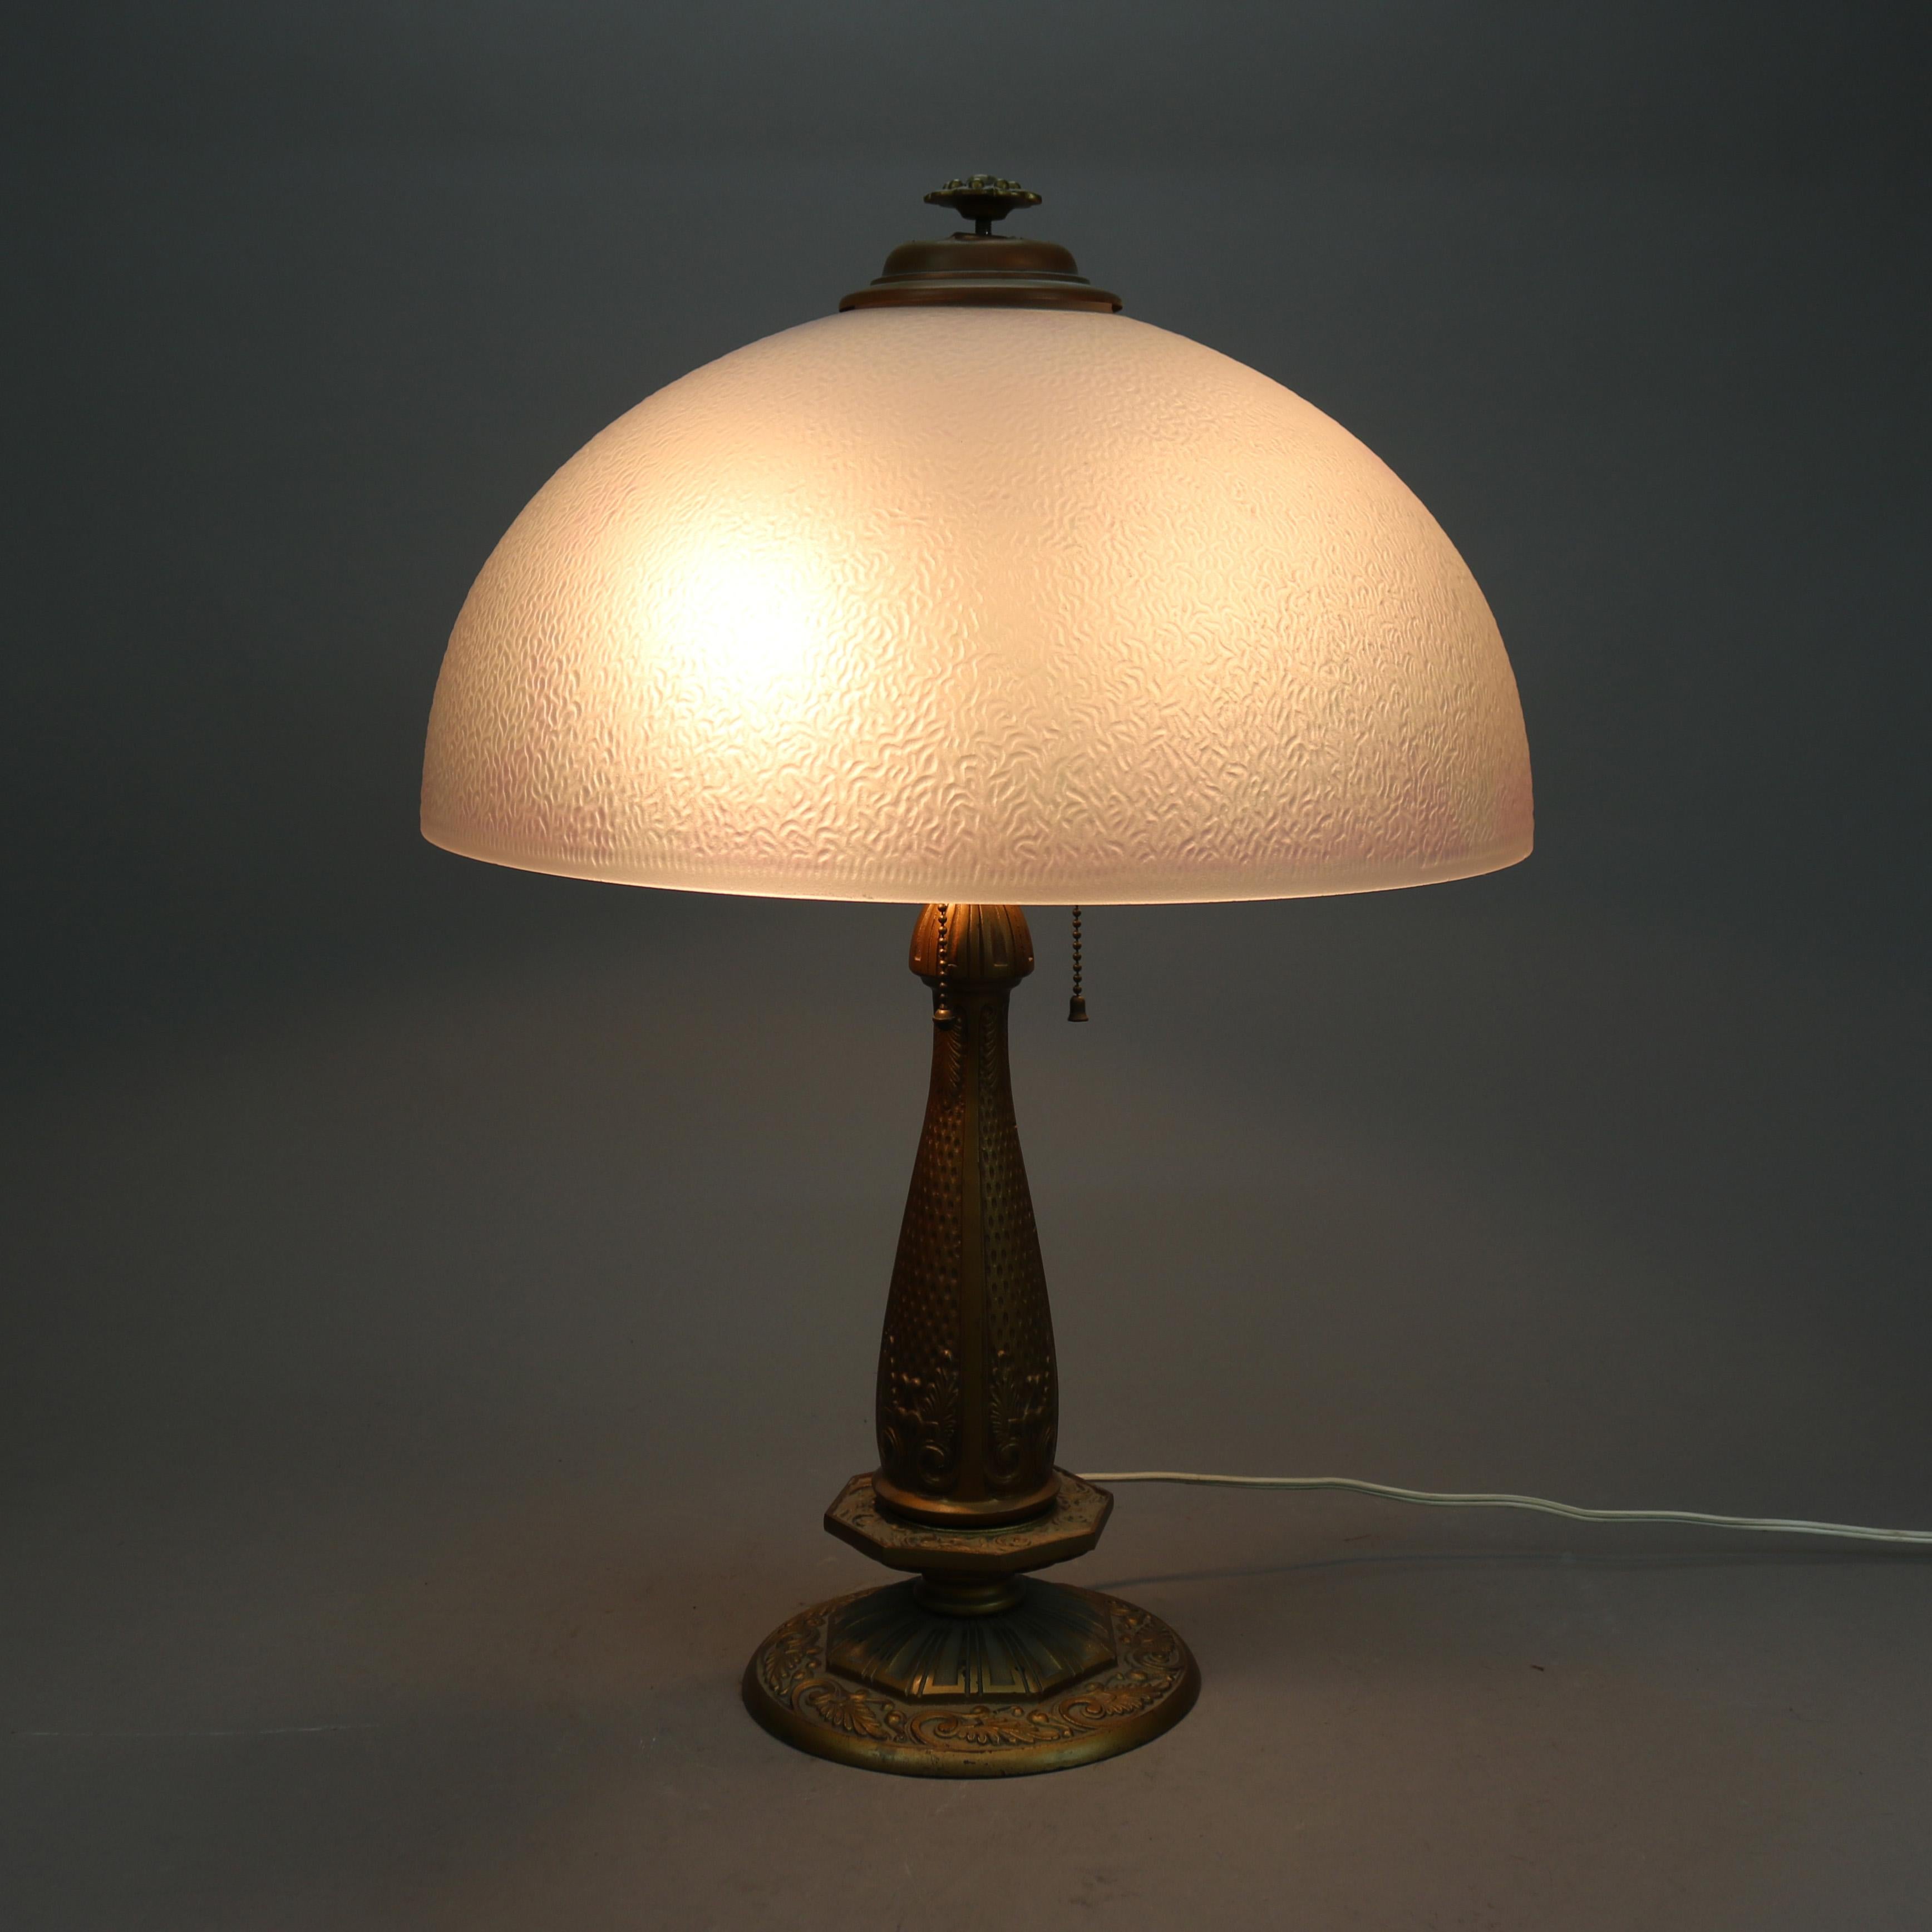 American Antique Arts & Crafts Pittsburgh School Table Lamp, Chipped Ice Shade, C1920